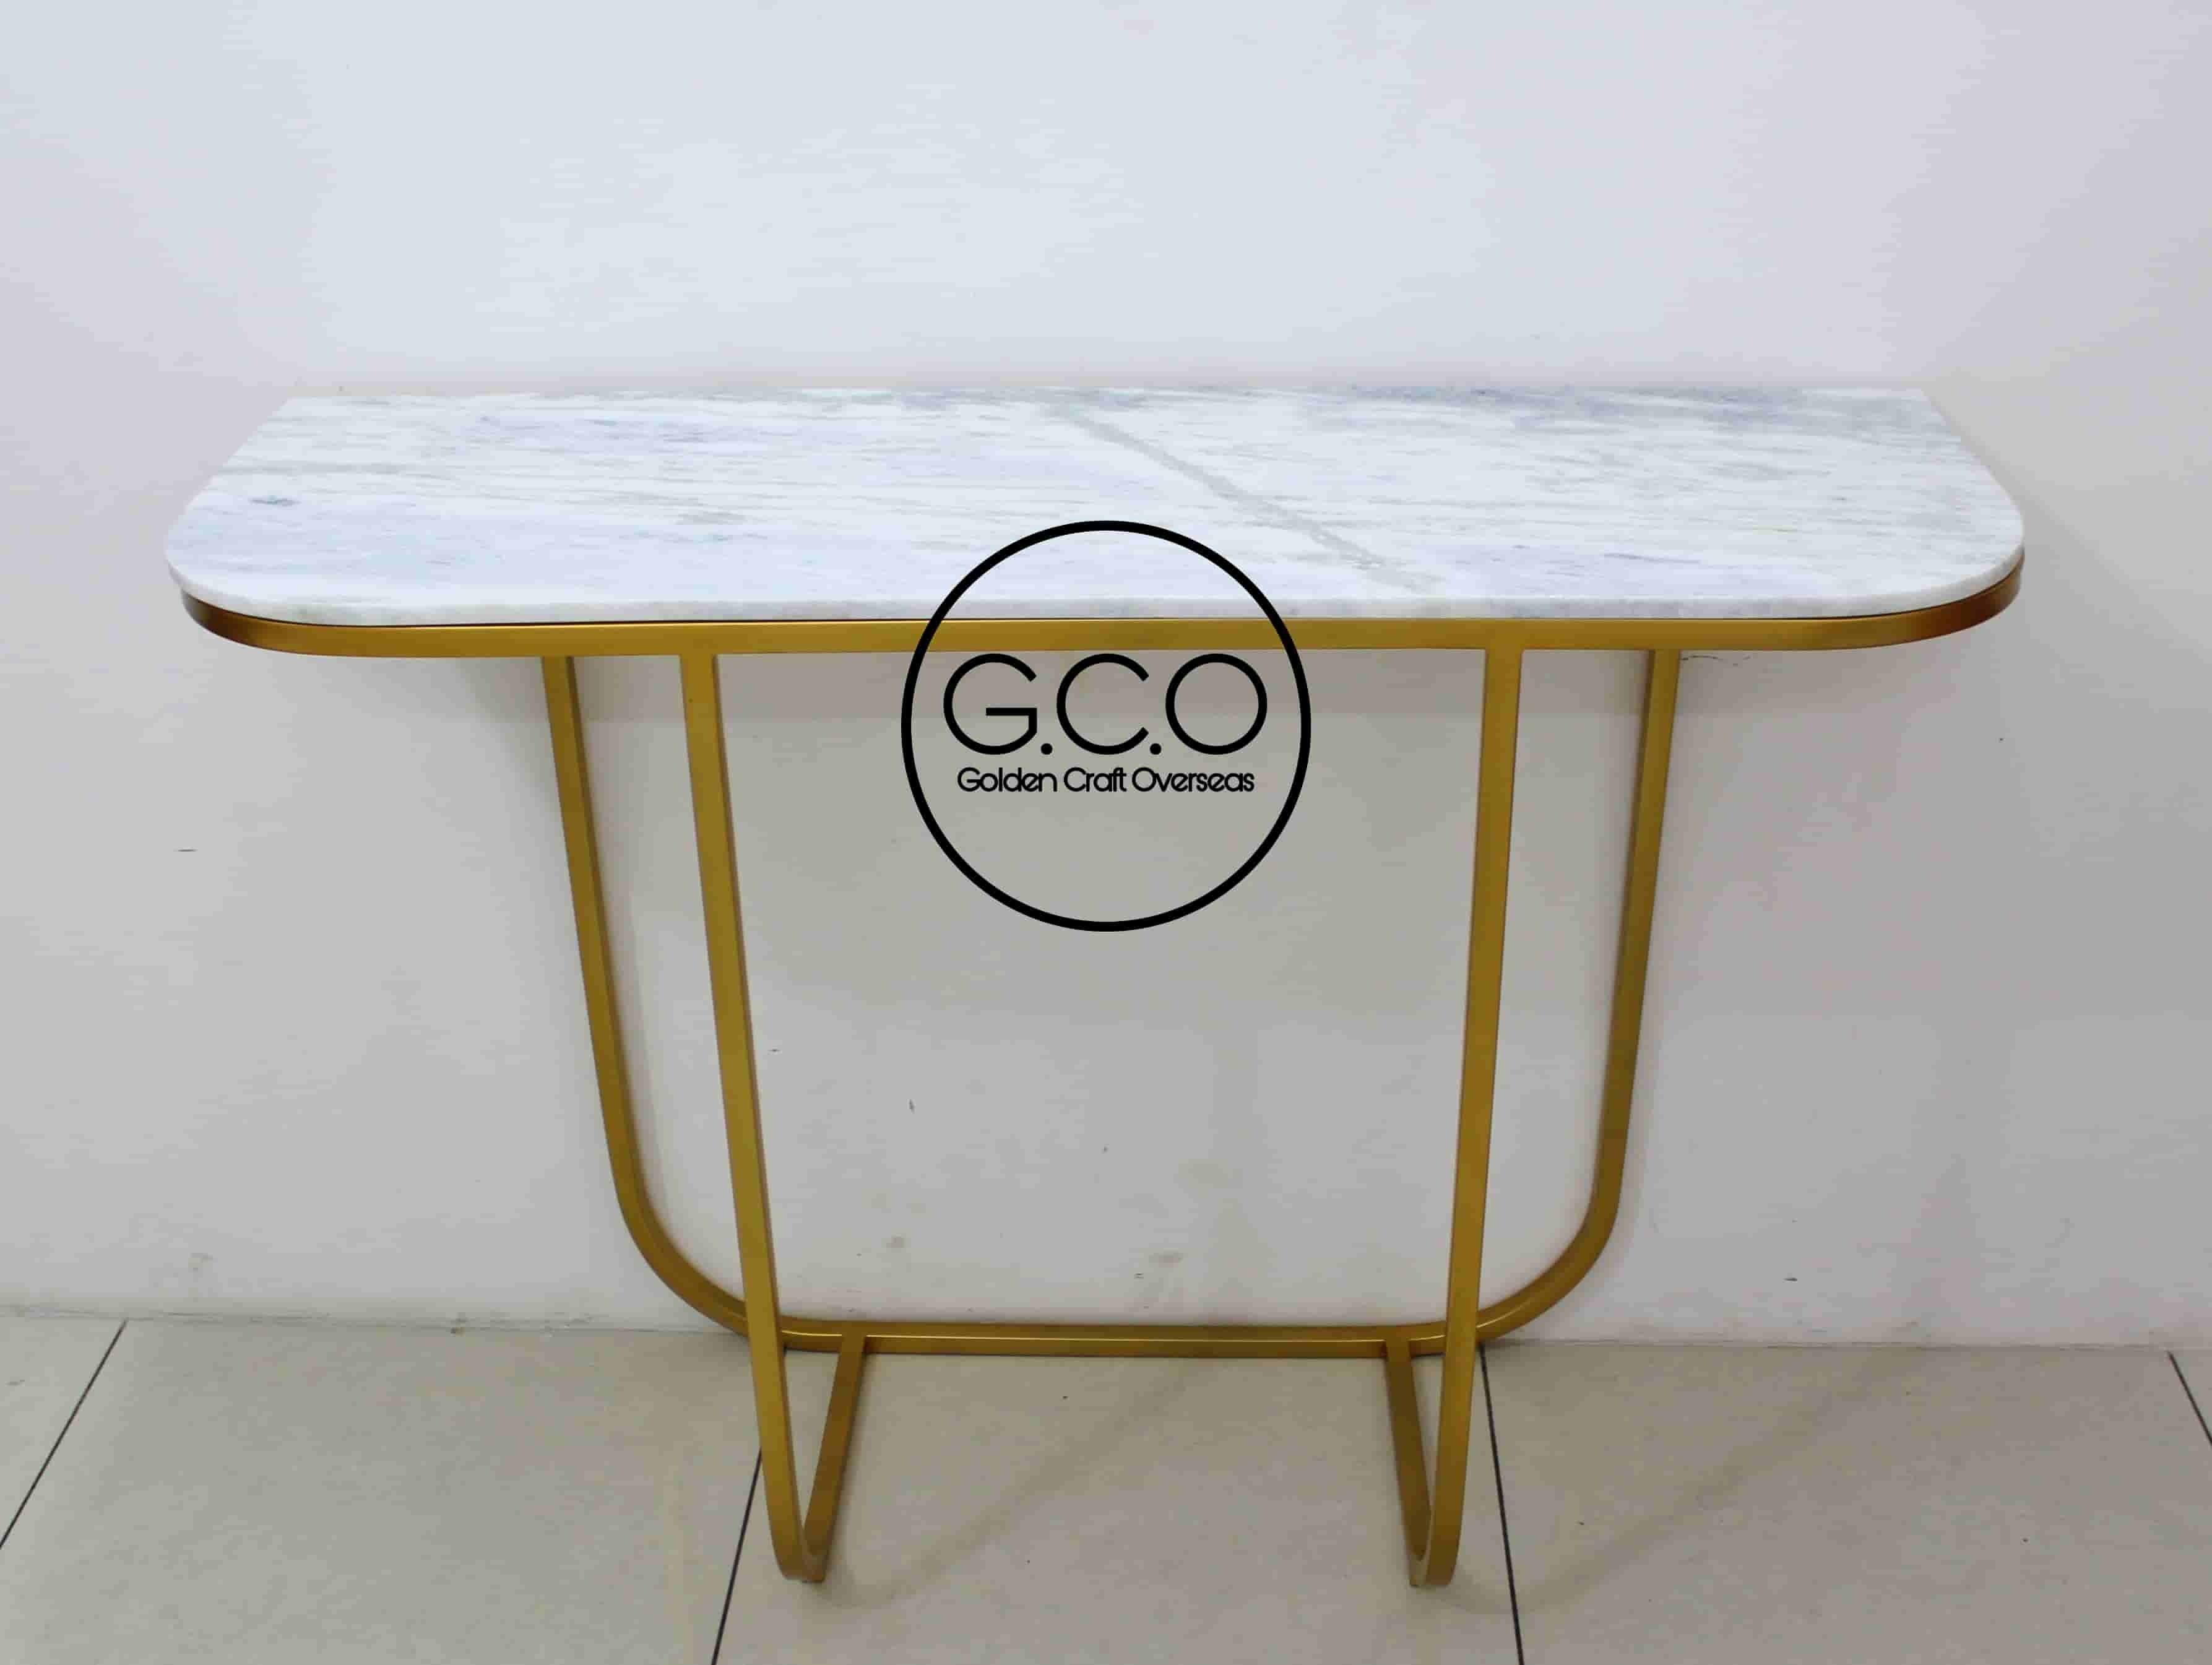 Afforadable Console Table In iron with marble top modern contemporary design